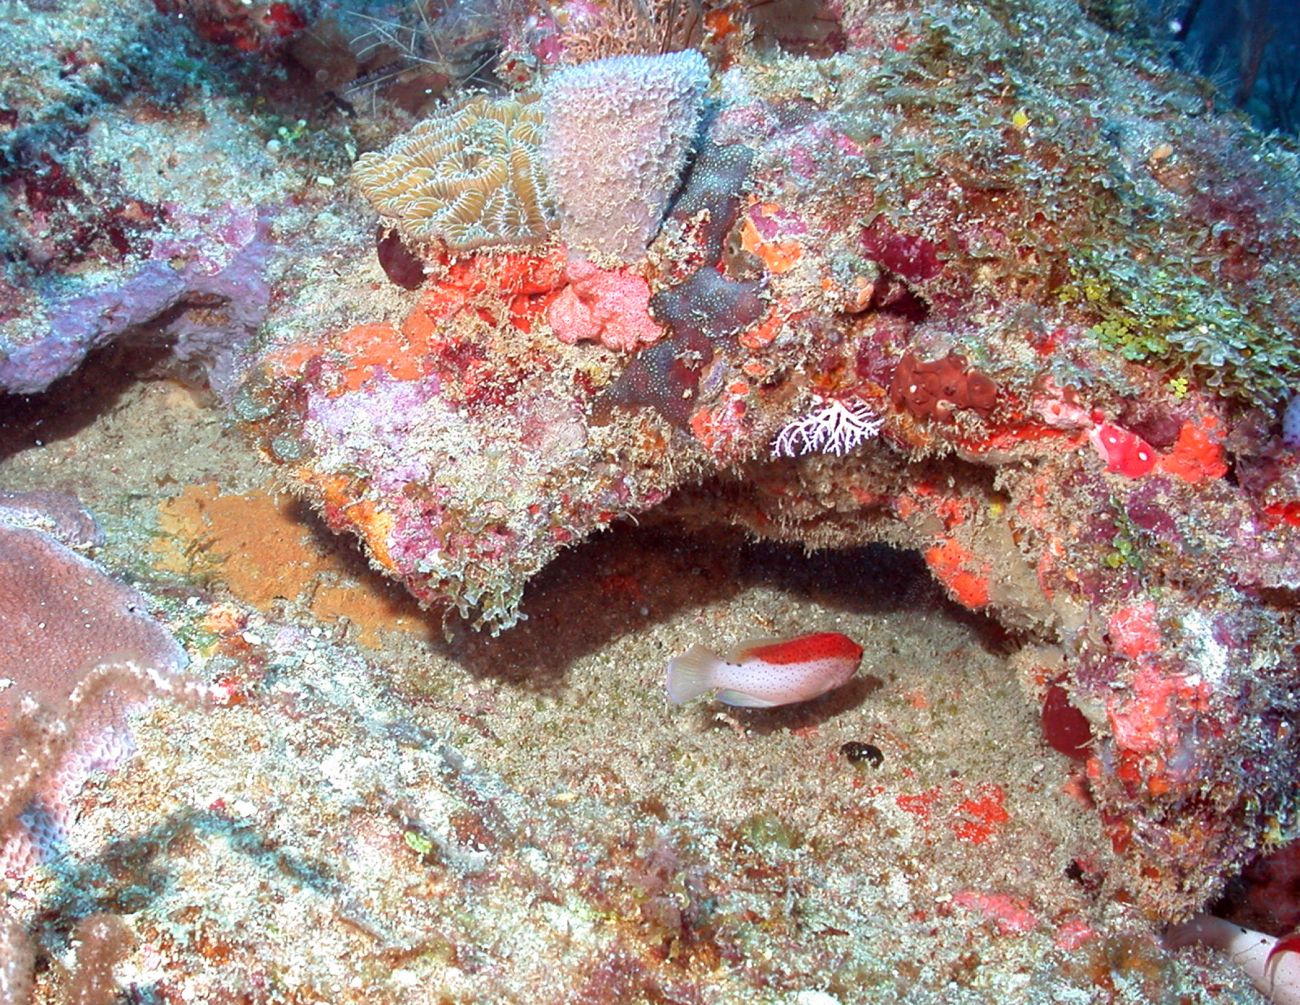 Corals, sponges, algae, and hydroids are all visible with a juvenile coney inthe center foreground